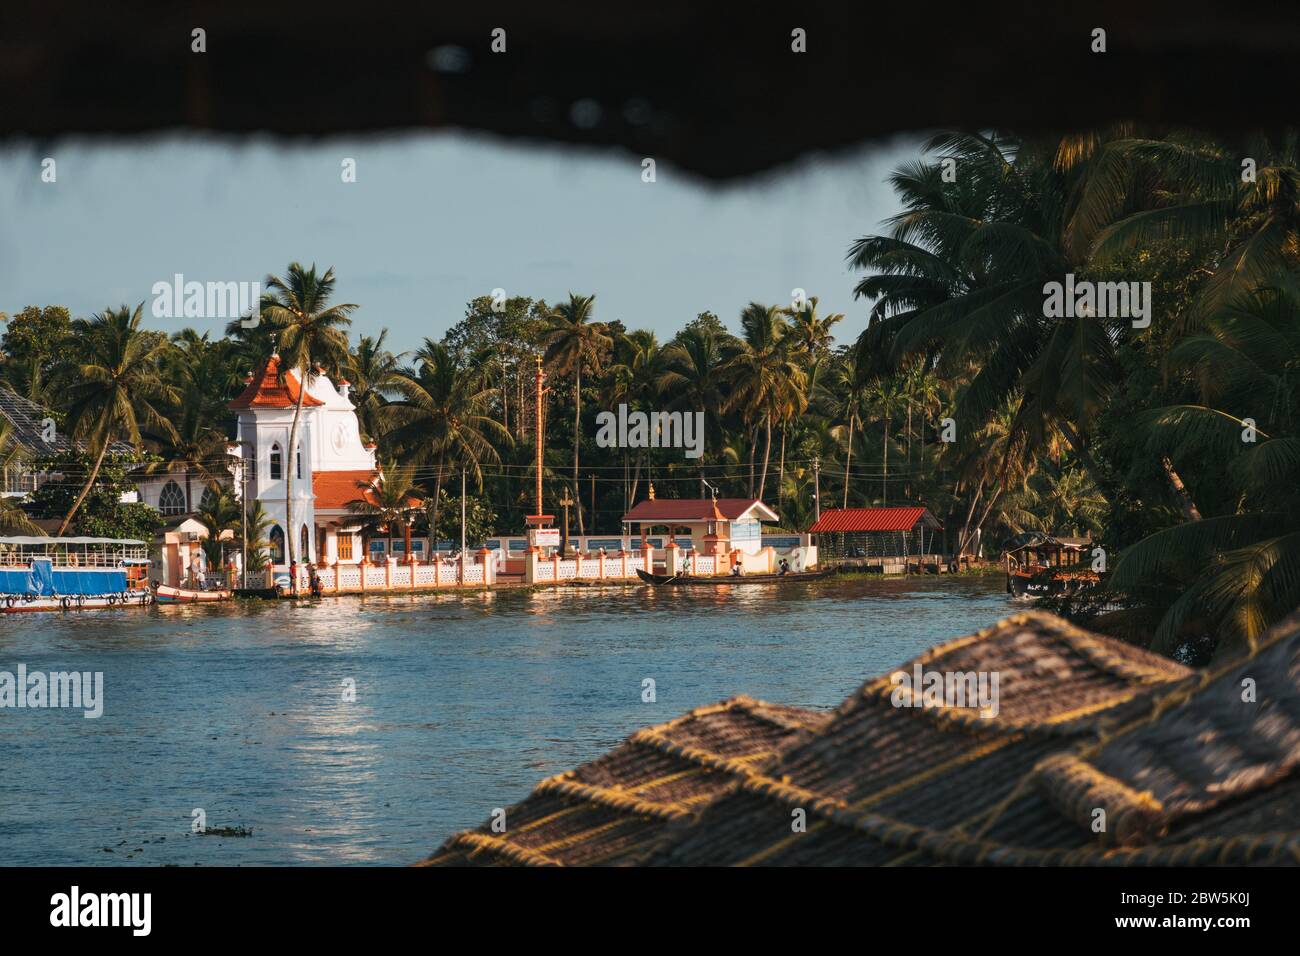 A small Christian church on the banks of the Kerala backwaters in India, seen from the rear of a houseboat Stock Photo